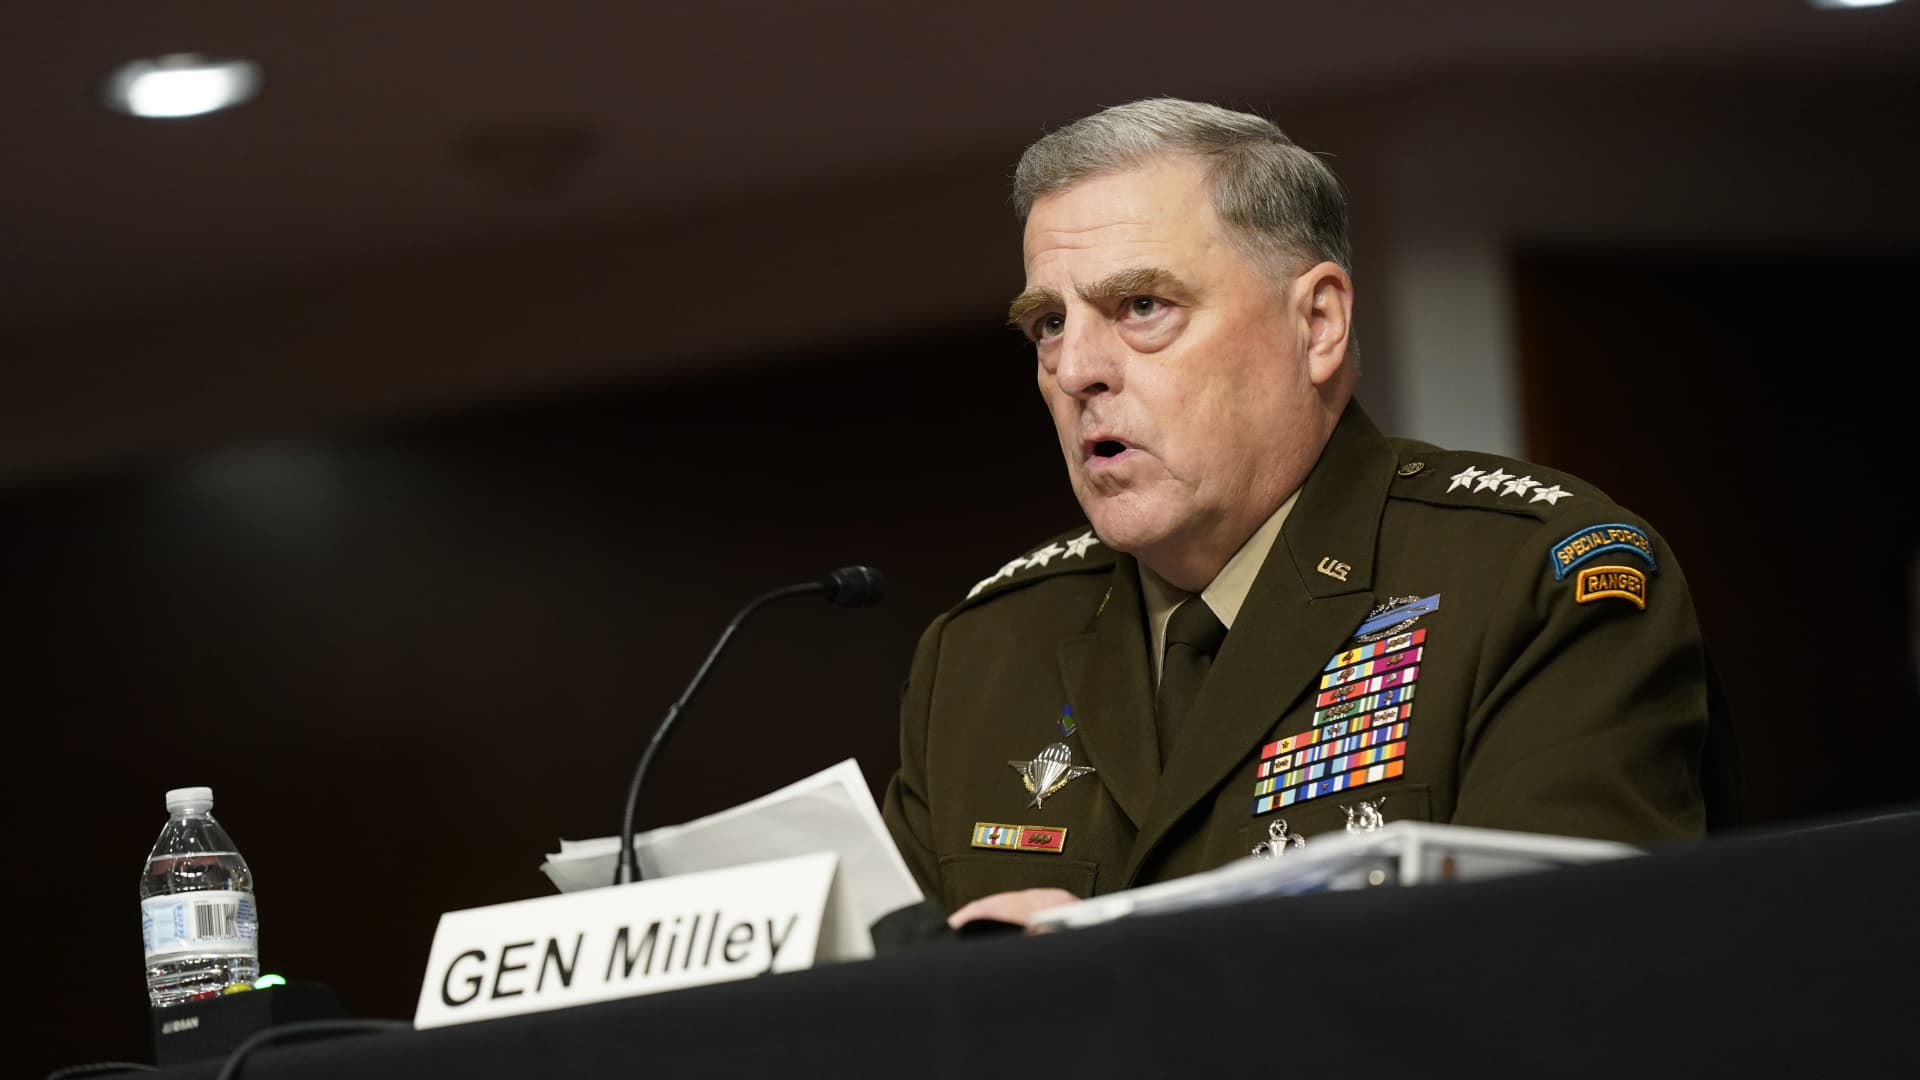 Chairman of the Joint Chiefs of Staff Gen. Mark A. Milley speaks during a Senate Armed Services Committee hearing on the conclusion of military operations in Afghanistan and plans for future counterterrorism operations on Capitol Hill on September 28, 2021 in Washington, DC.